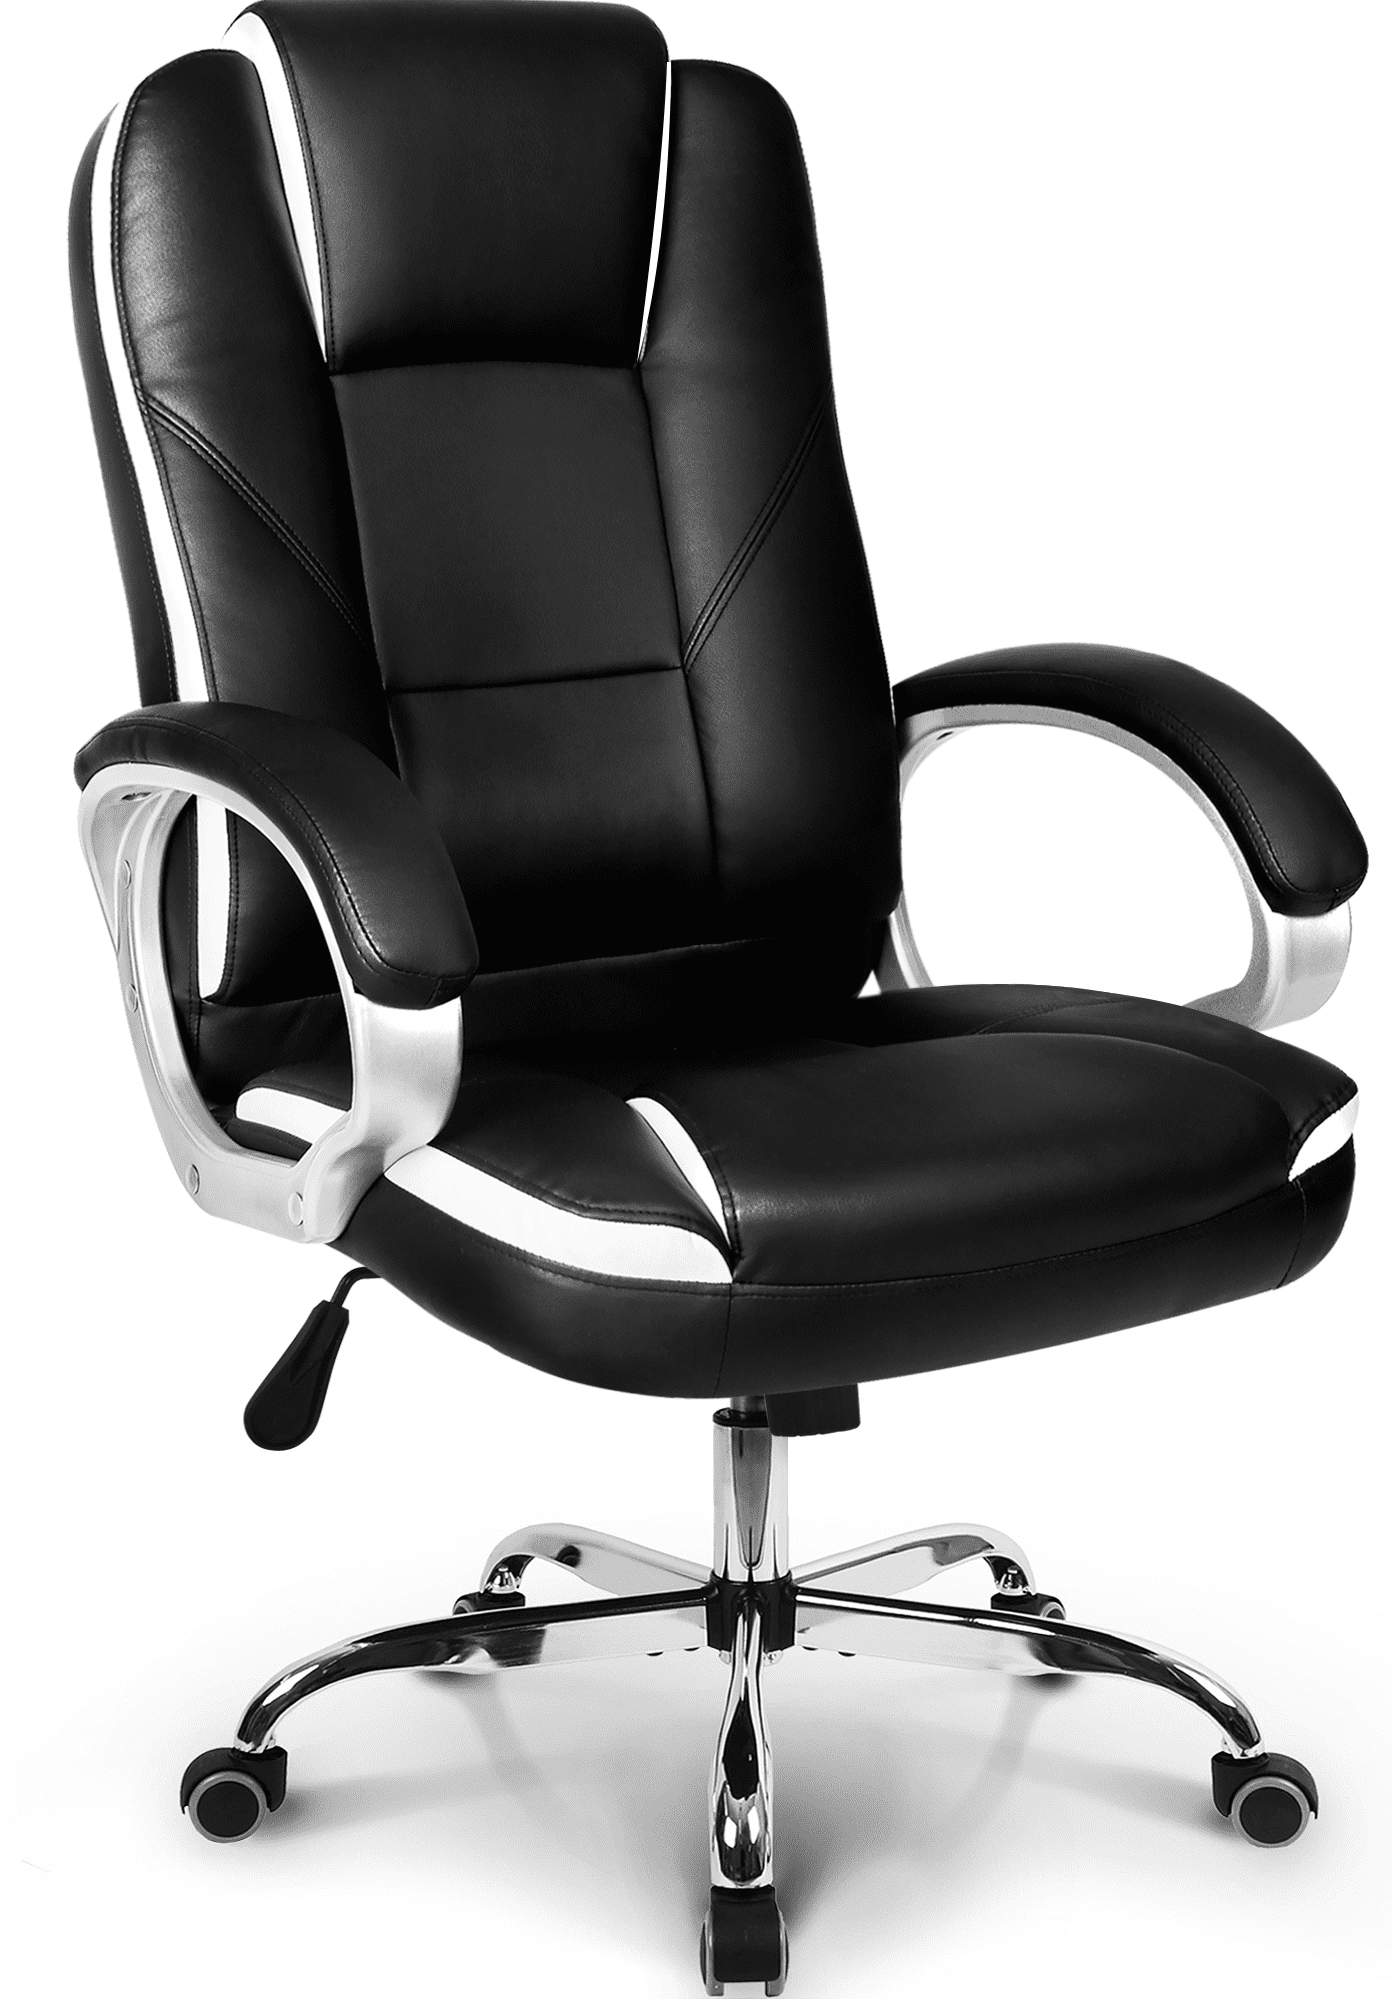 Ergonomic High Back Cushion Lumbar Support with Wheels Comfortable Black Upholstered Leather Racing Seat Adjustable Swivel Rolling Home Executive Neo Chair Office Chair Computer Desk Chair Gaming 